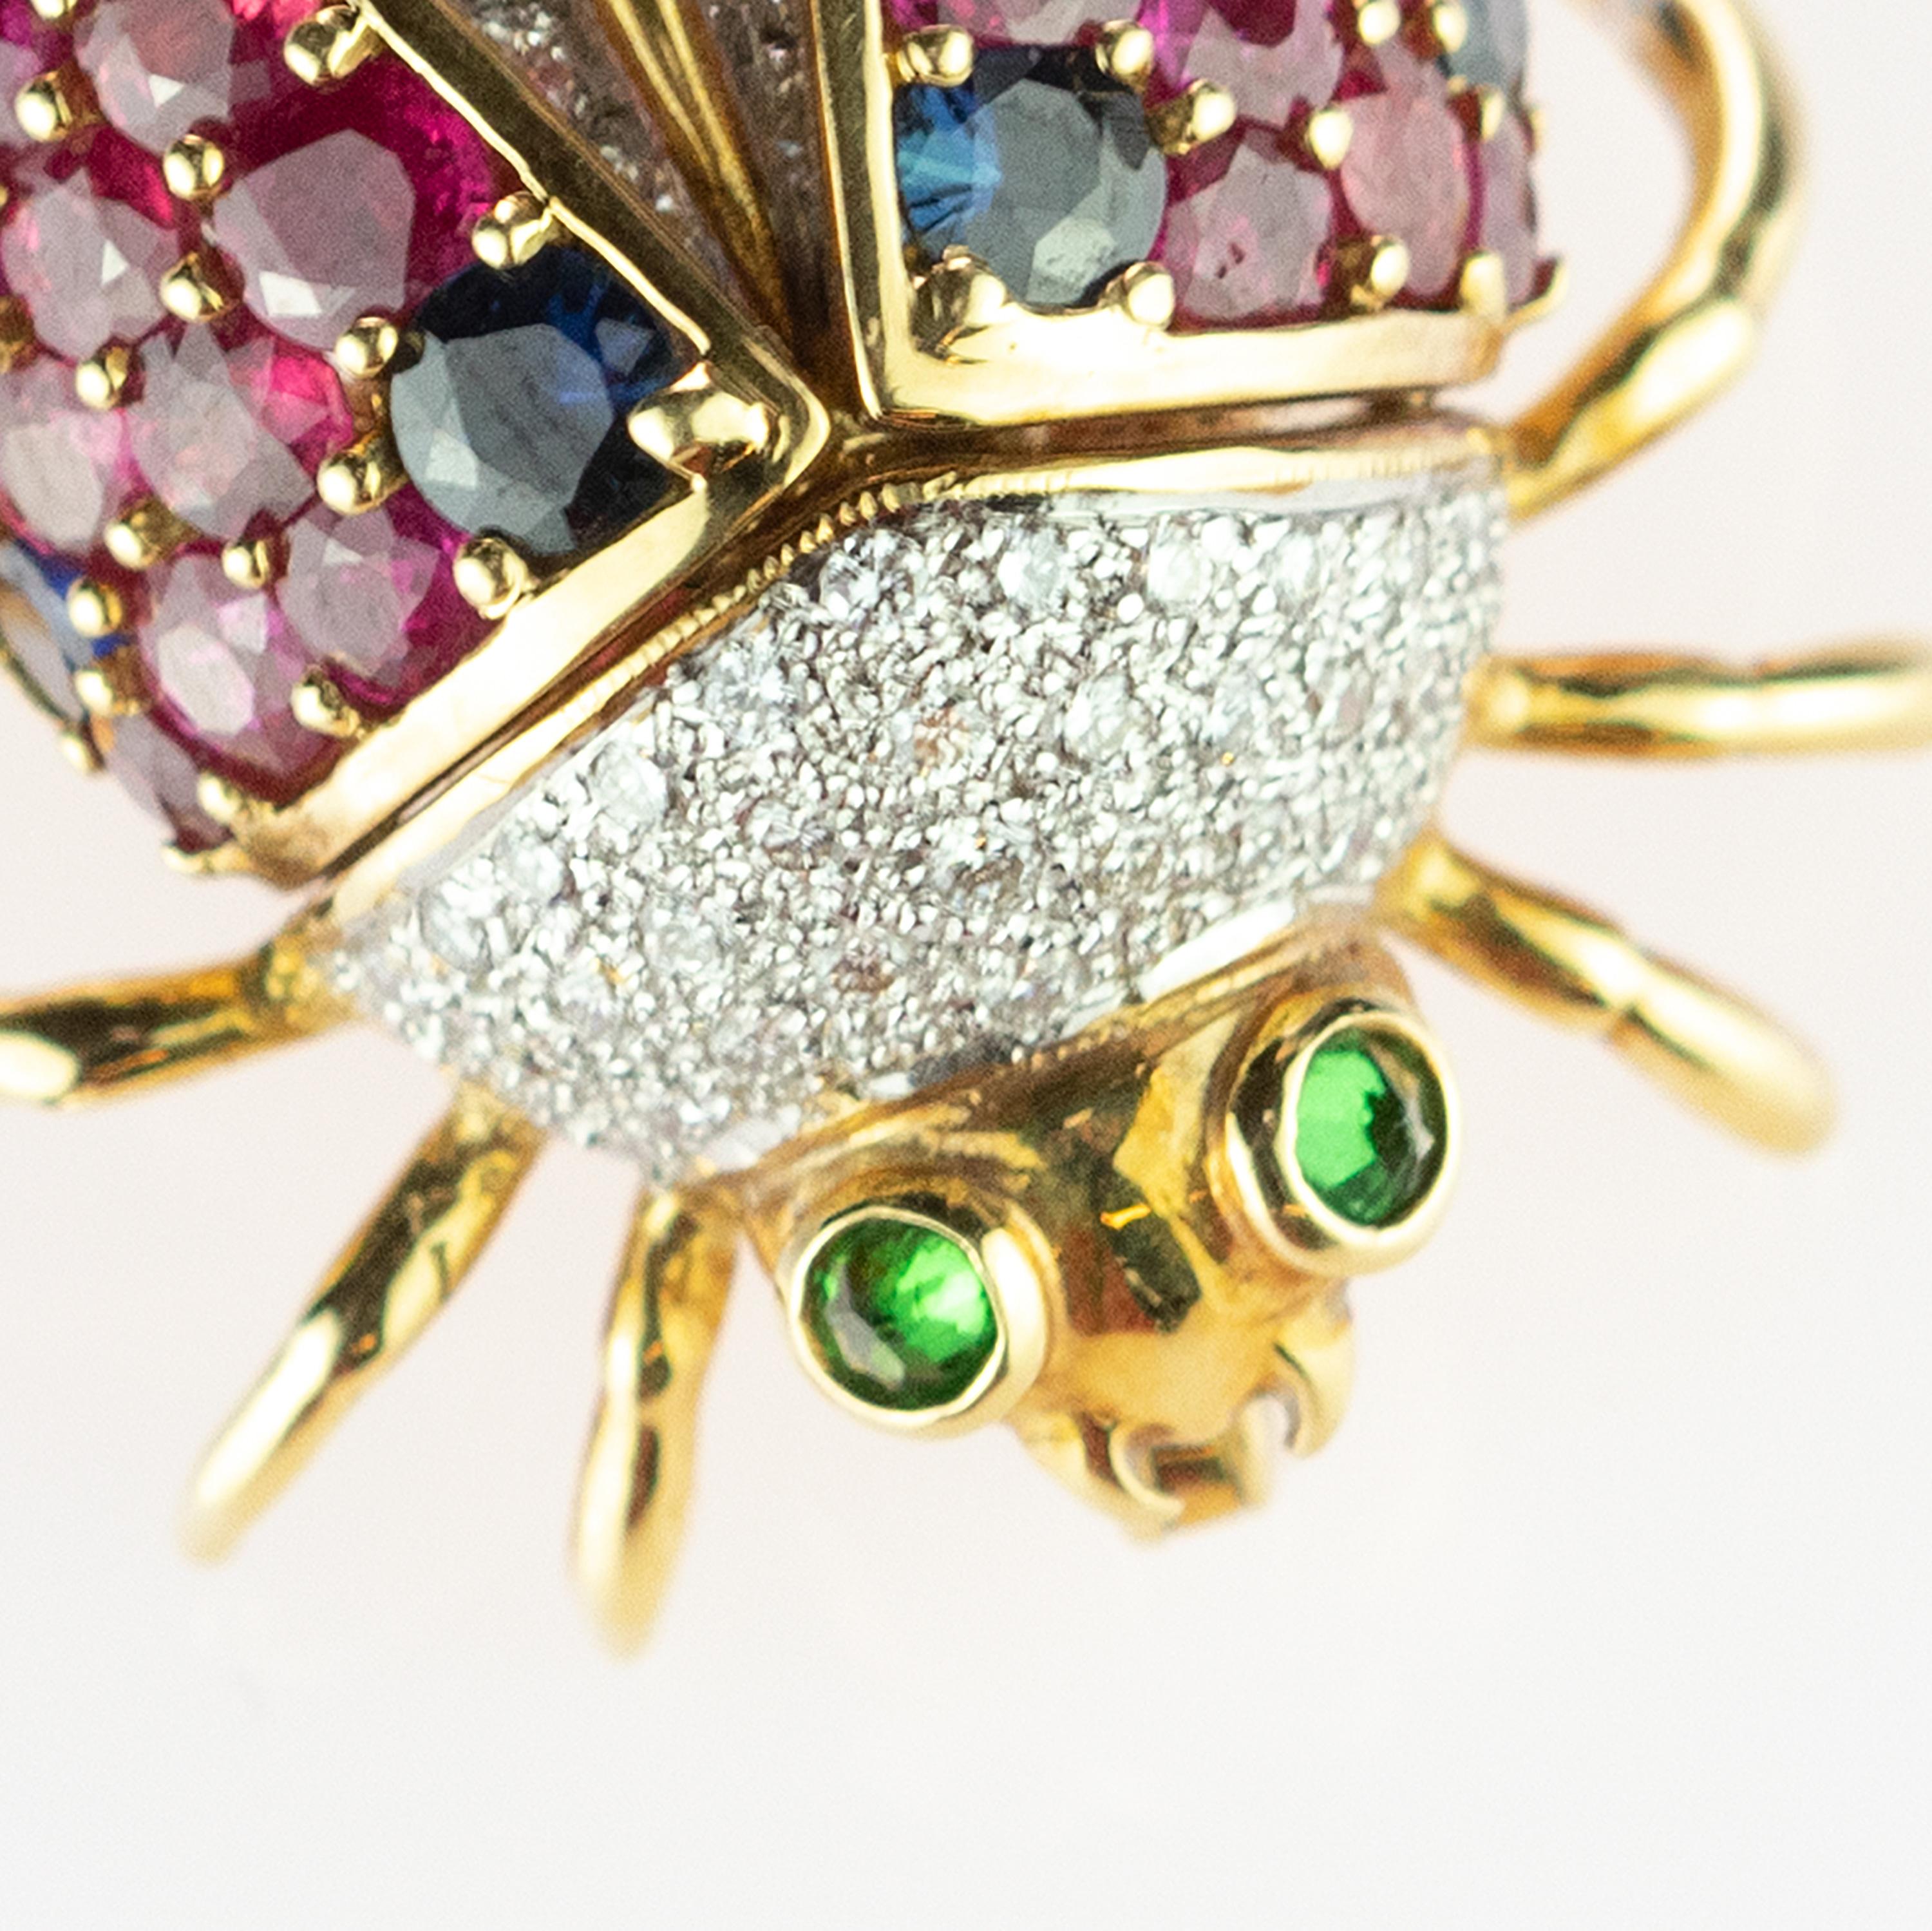 Lucky and glorious brooch in a Ladybug shape embellished with a diamond pave of 0.92 carats over 90 gems and surrounded by 18 karat yellow gold feet and antennas. The well-known and very sophisticated red wings are decorated by 32 rubies for a total